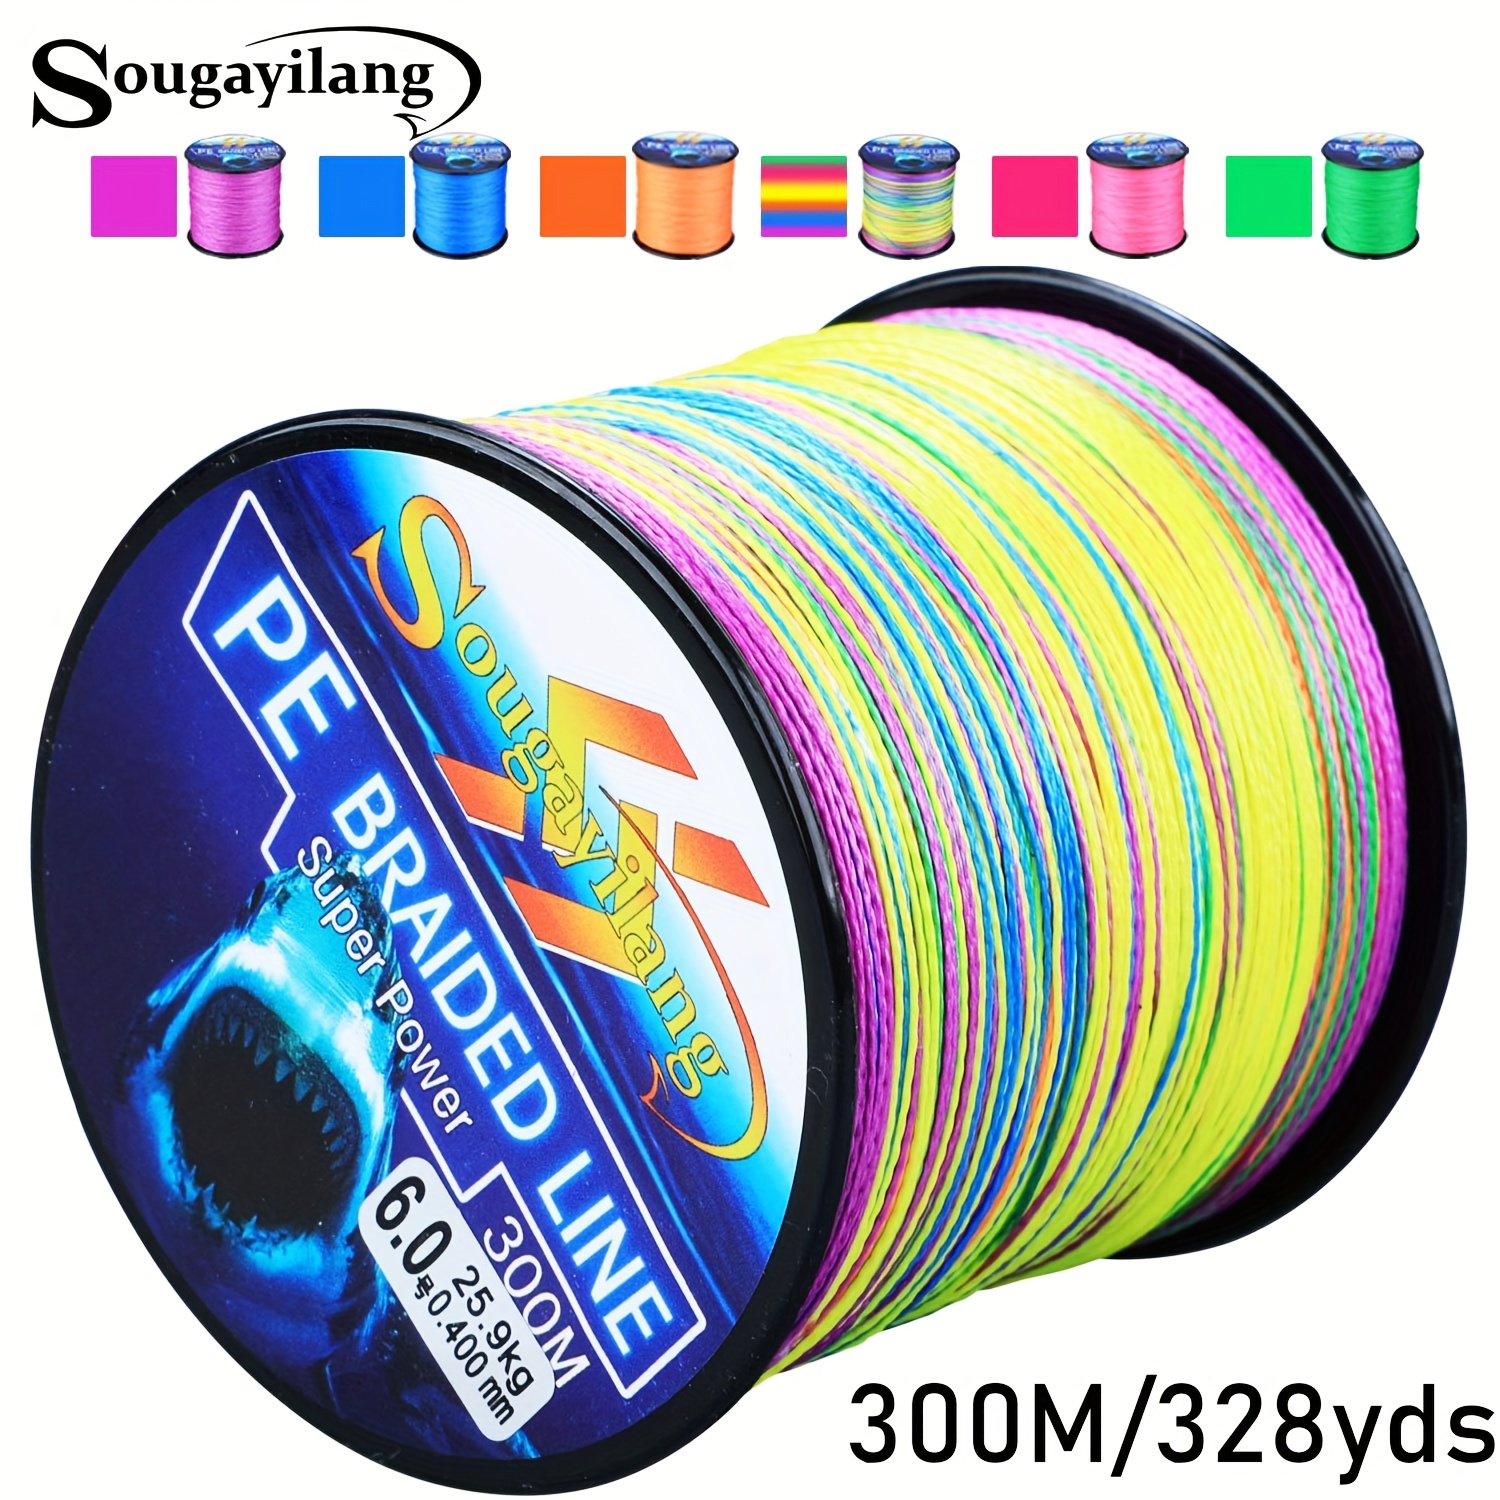 Sougayilang 550m Monofilament Fishing Line - Super Strong And Durable For  Maximum Fishing Performance, Free Shipping For New Users